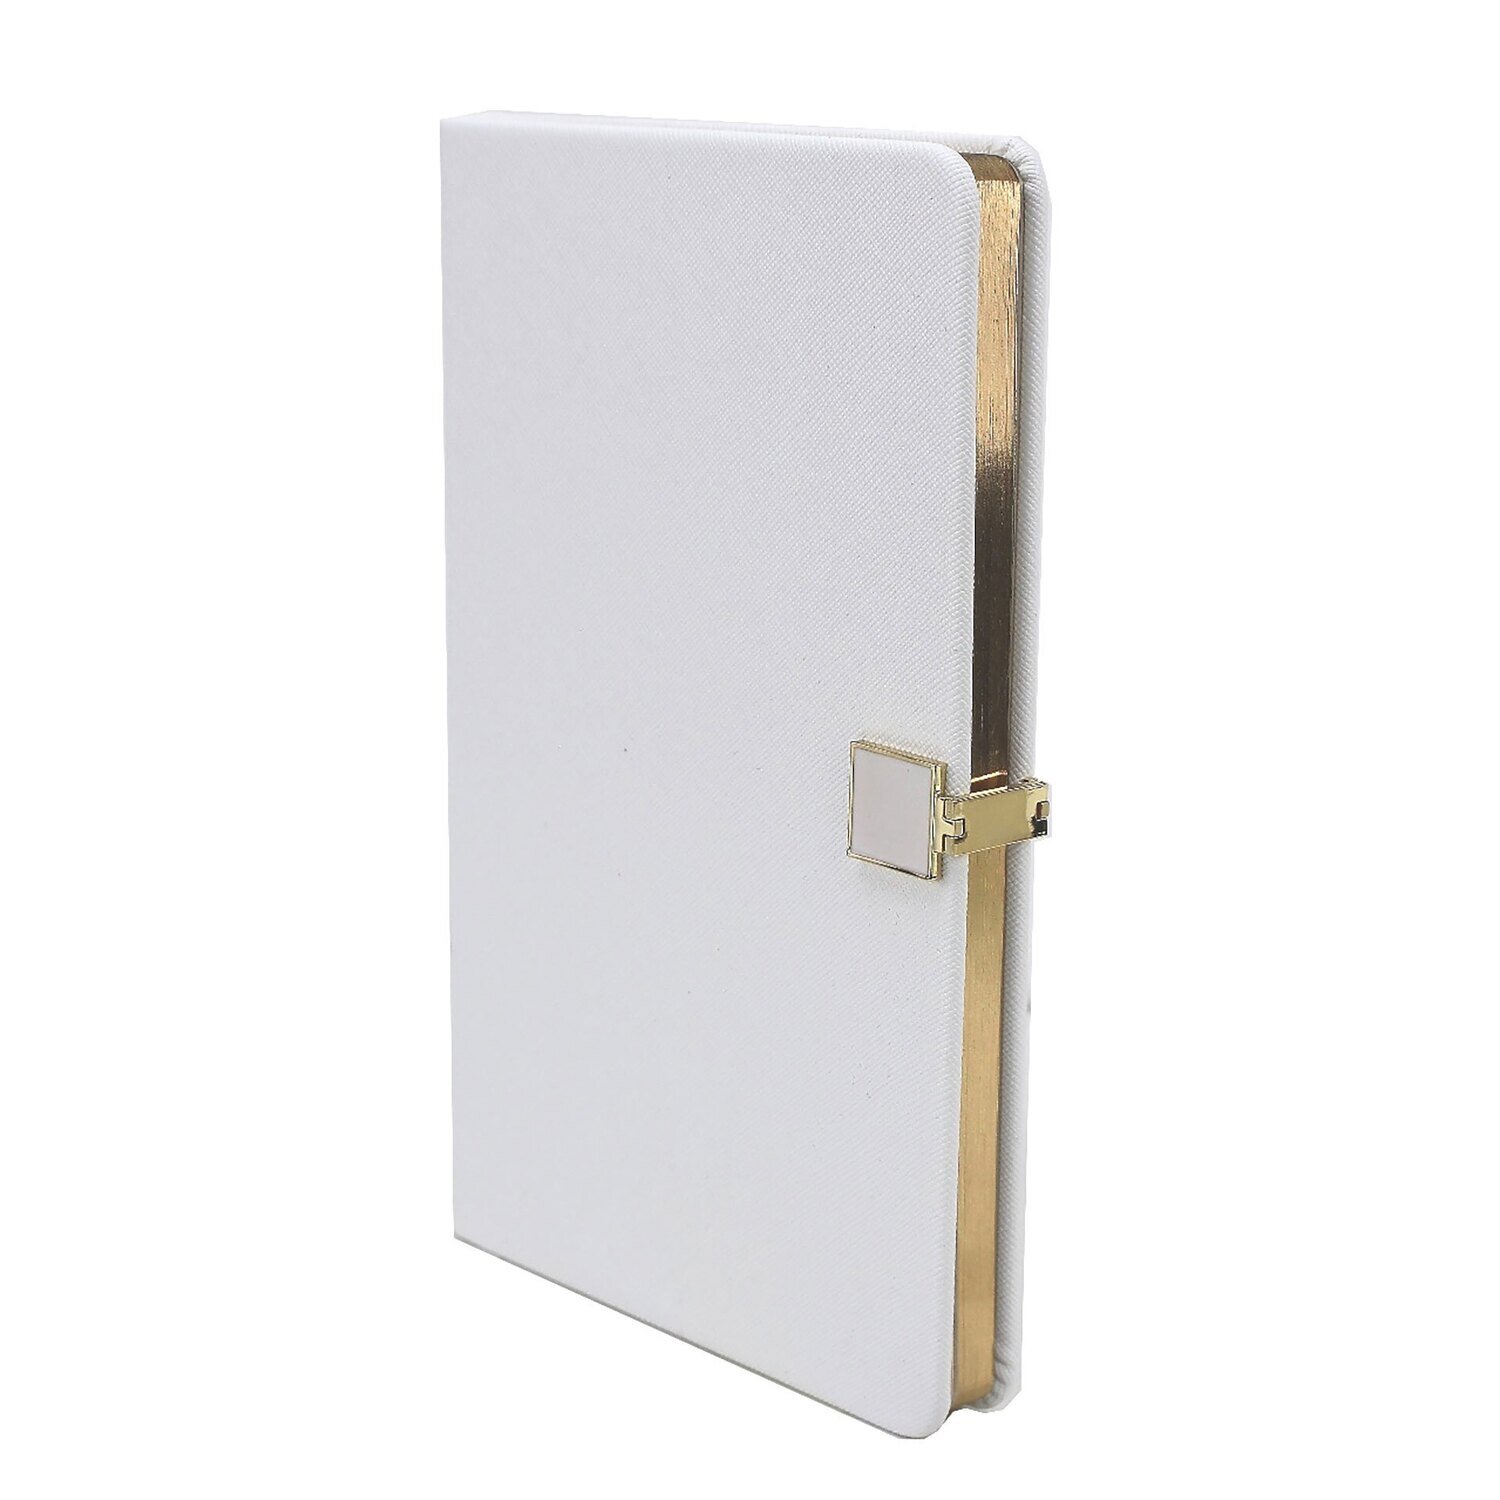 Addison Ross Notebook A5 5x8" Gold White Pu Leather NB1004